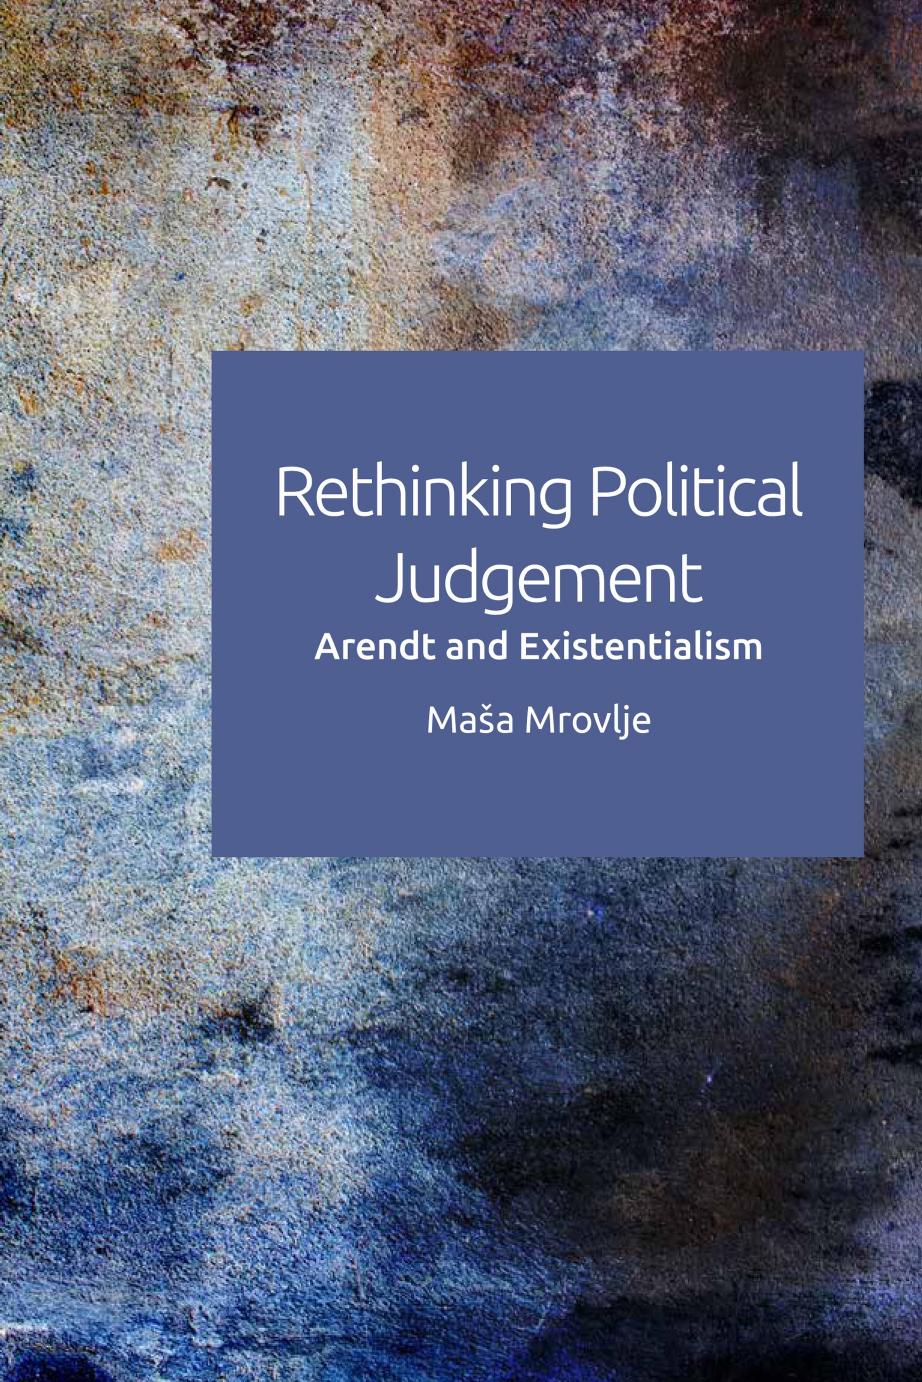 Rethinking Political Judgement: Arendt and Existentialism